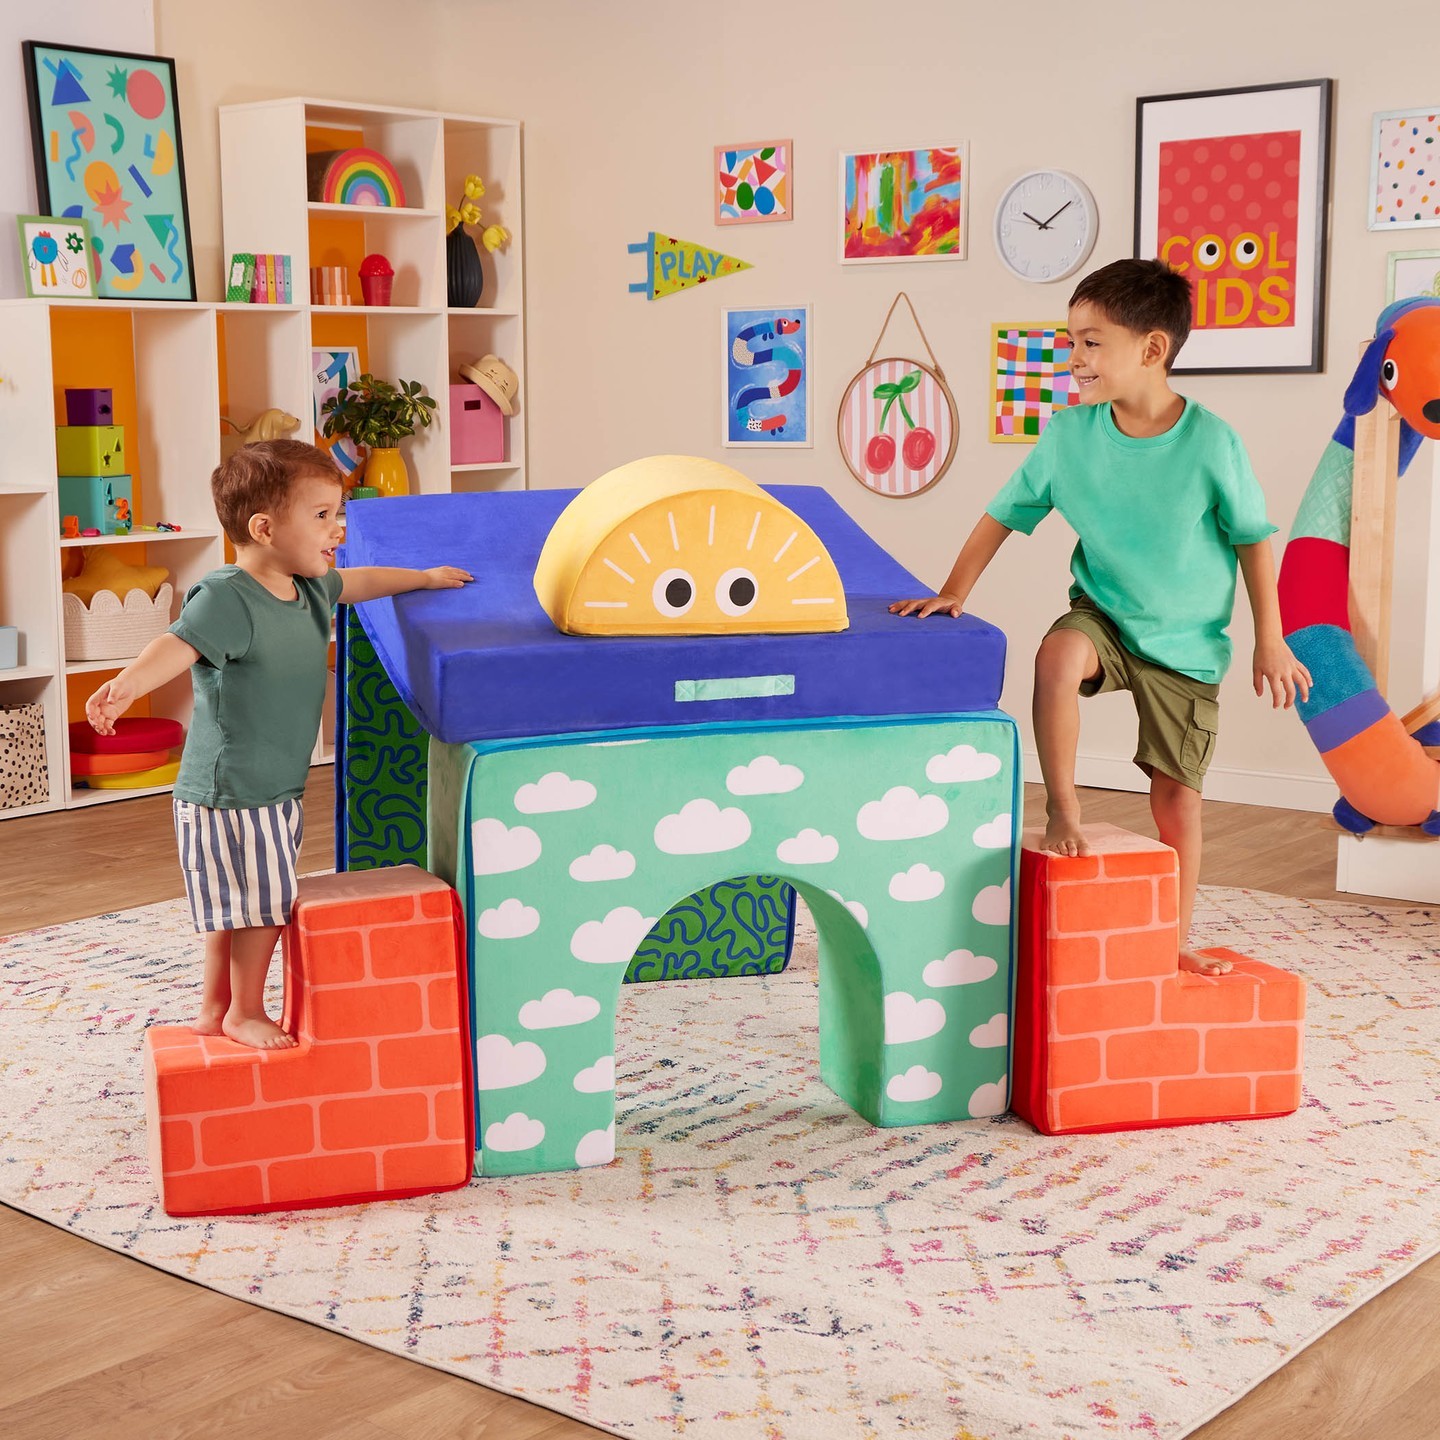 Two toddlers playing on foam play shapes in shape of castle or fort